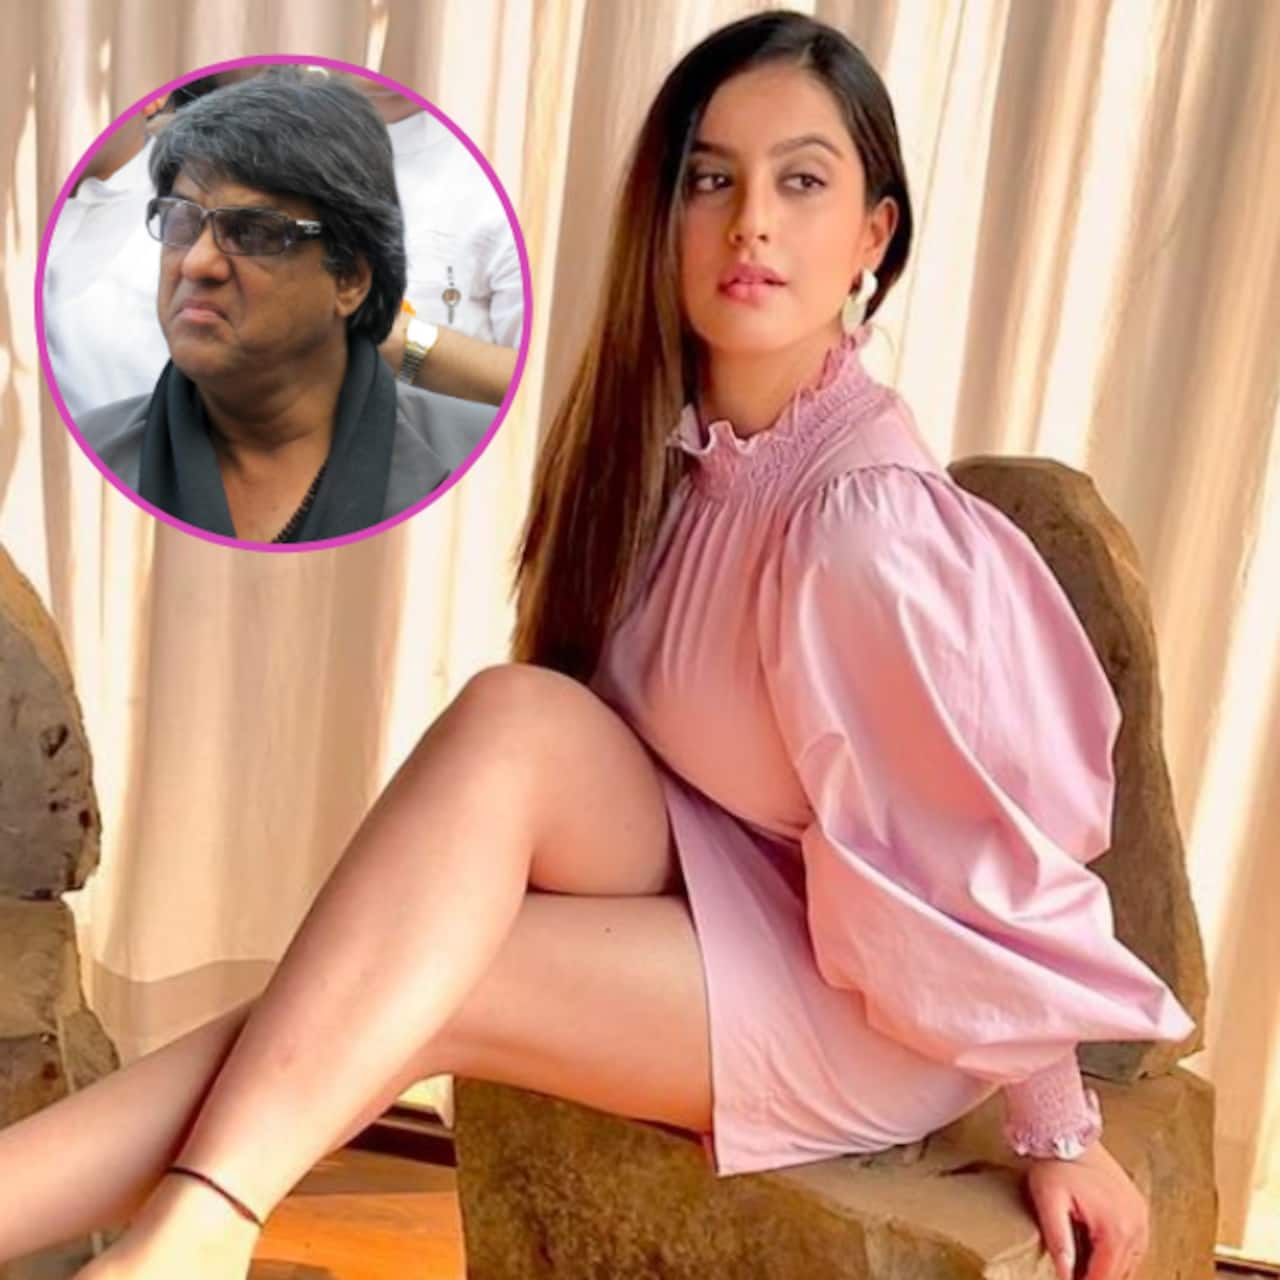 Tunisha Sharma Suicide Case: Mukesh Khanna gives his take on the situation; blames parents of young girls who send them to work in the industry [Watch]